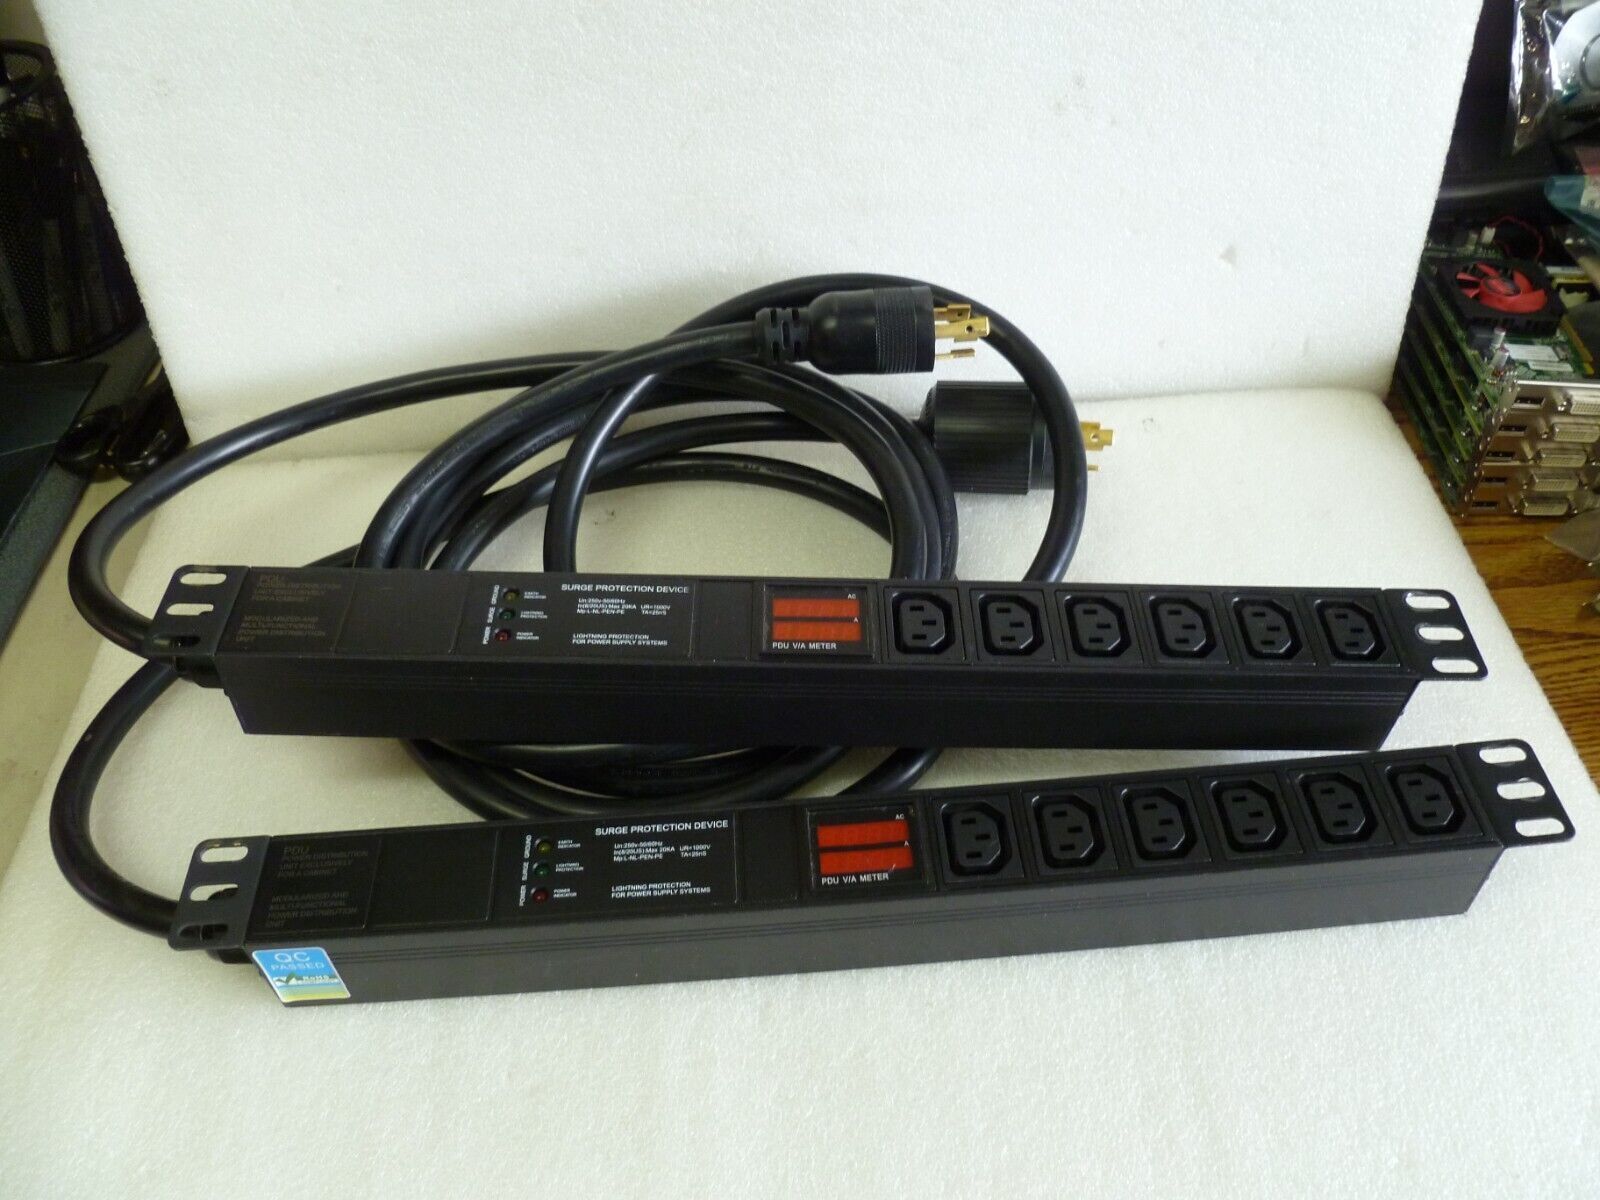 Lot of 2 LCD Metered PDU 250V-50/60HZ 30AMP Cryptocurrency Mining